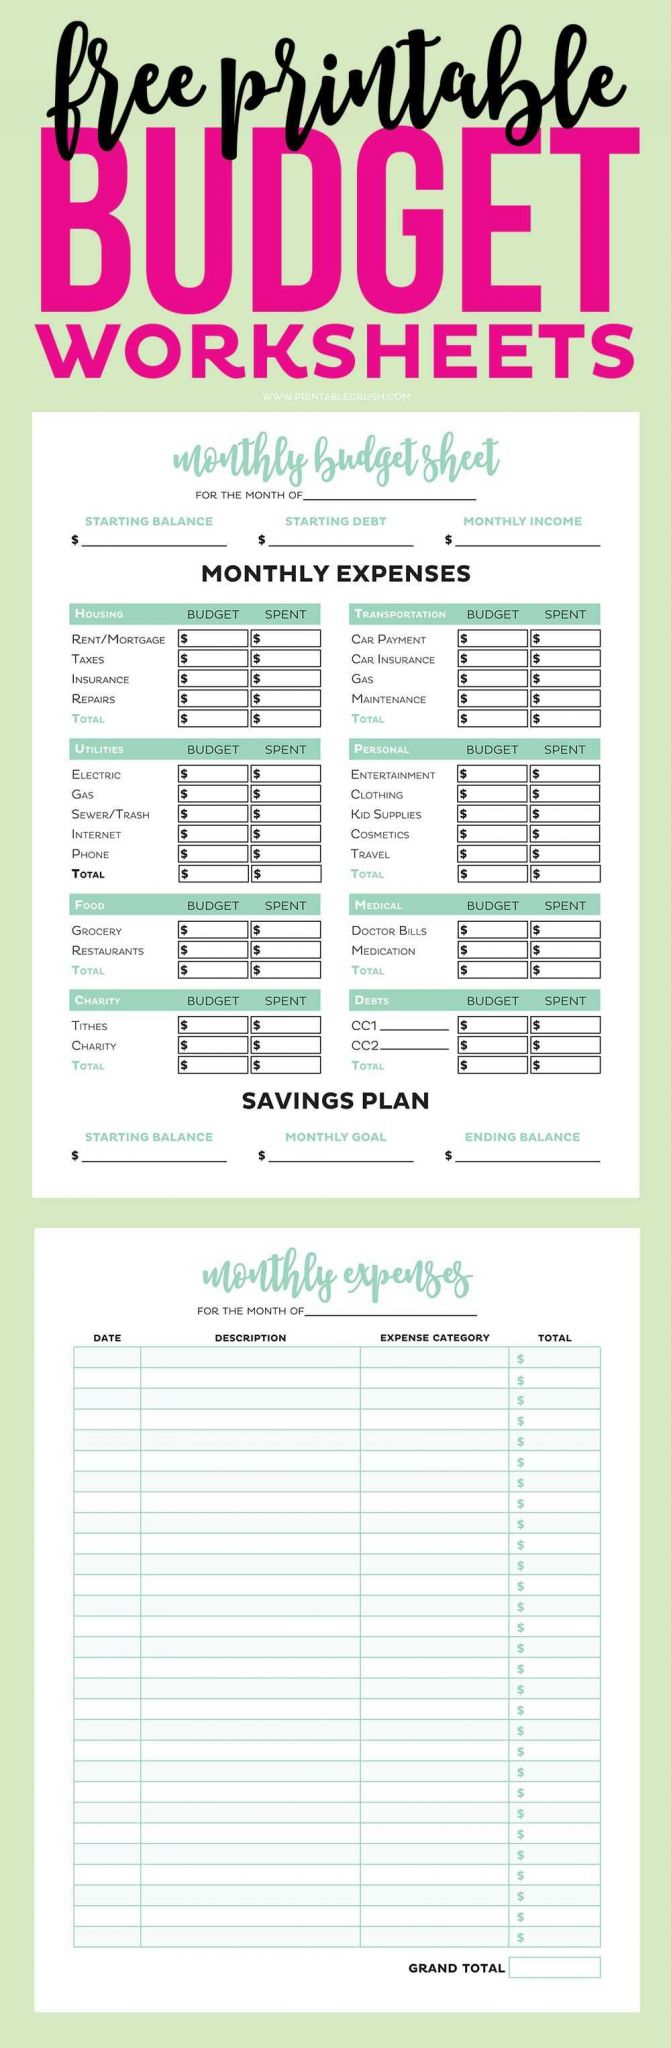 Downloadable Budget Worksheets together with Simple Free Printable Bud Worksheets